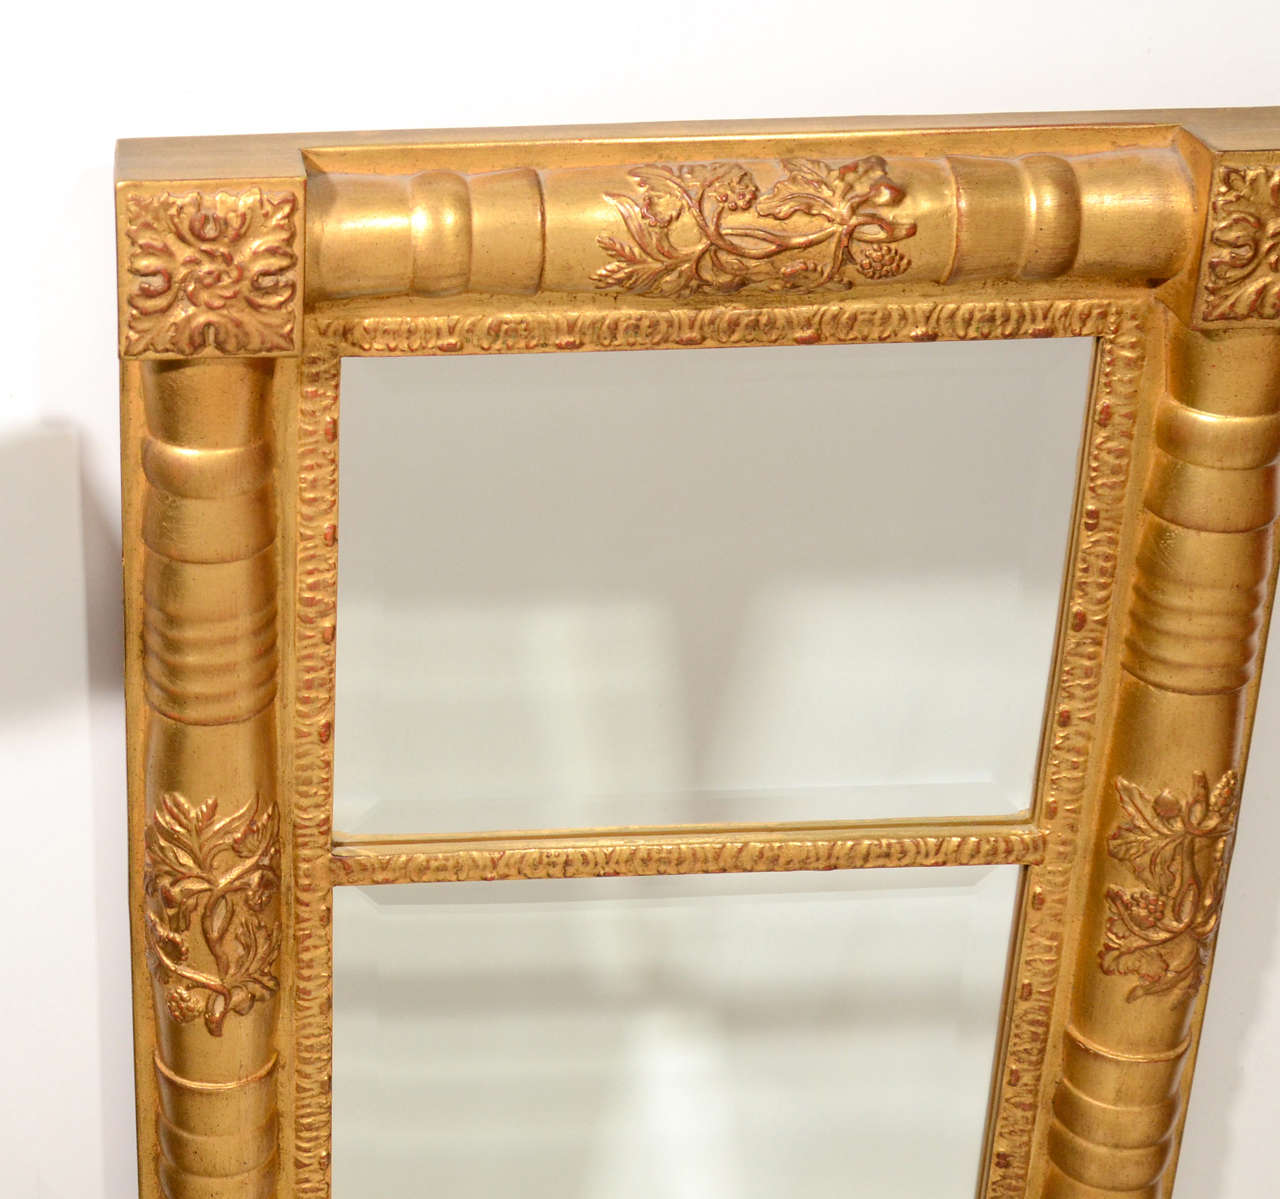 American Traditional Wood Mirror with Hand Laid Antique Gold Leaf and Hand-Carved Designs